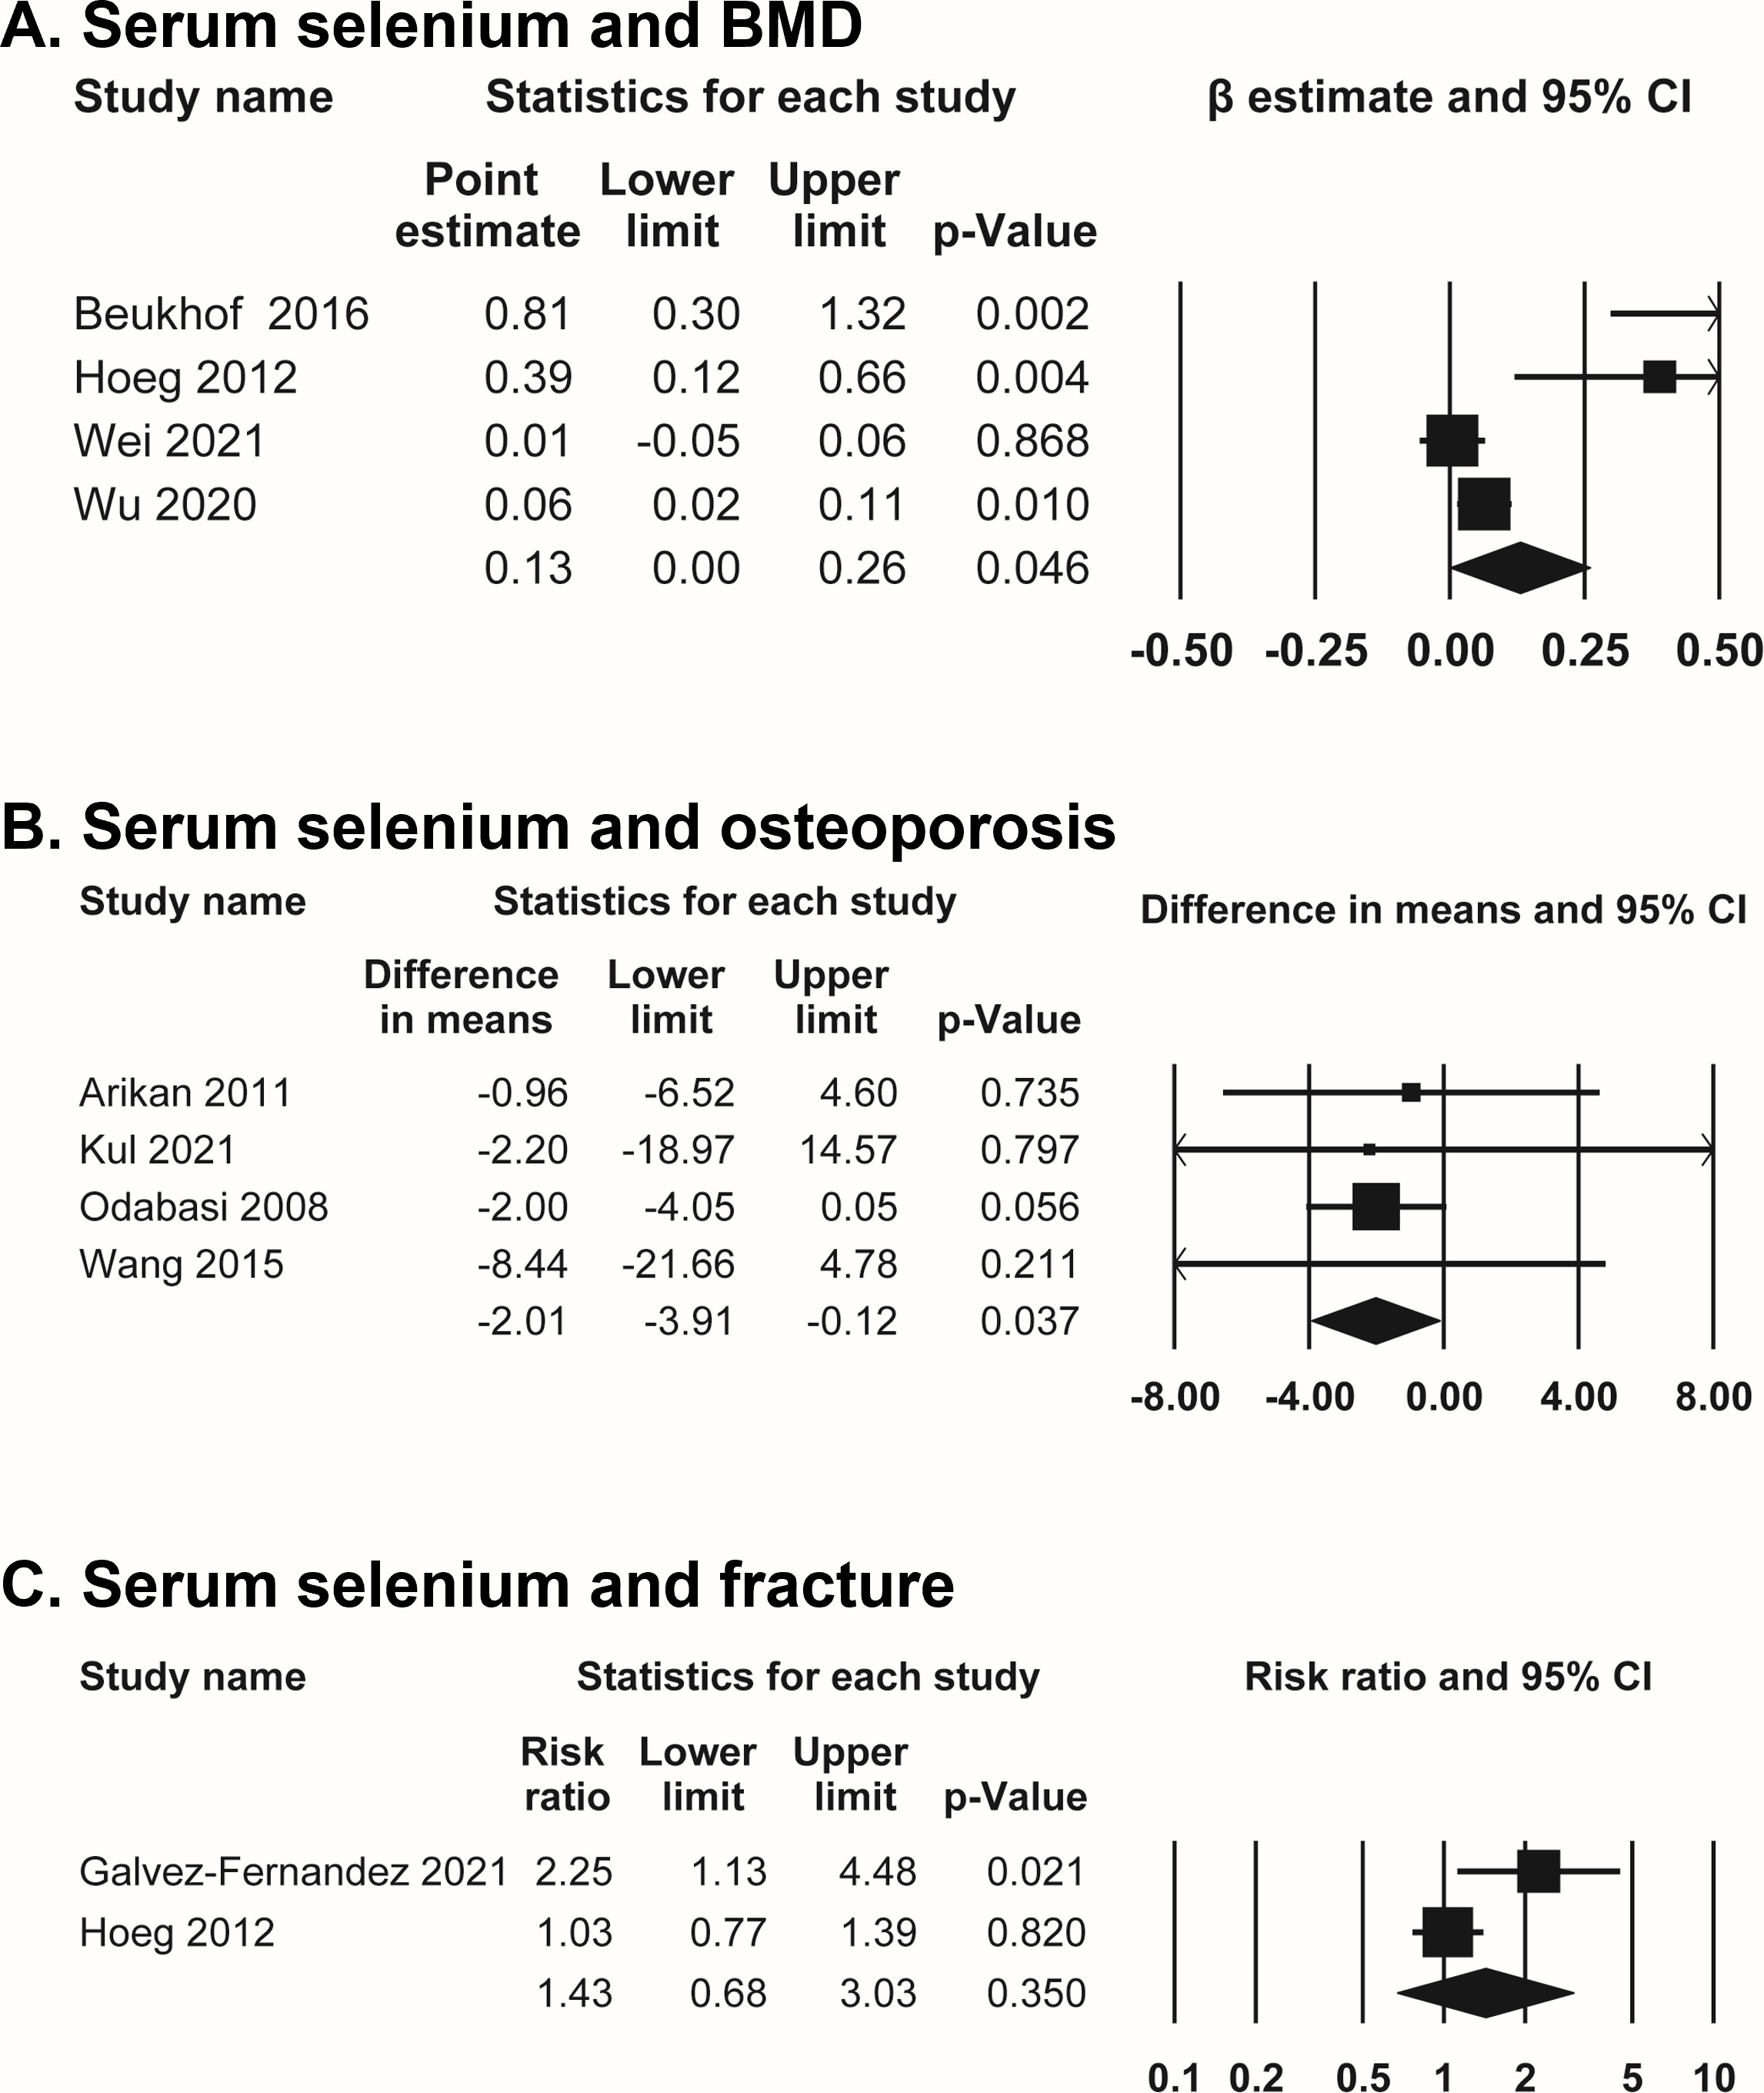 Fig. 3 
            Forest plots of association between serum selenium and bone health. a) Association between serum selenium and bone mineral density (BMD). b) Difference of serum selenium level between osteoporosis patients and non-osteoporosis controls. c) Association between serum selenium and osteoporotic fracture risk. CI, confidence interval.
          